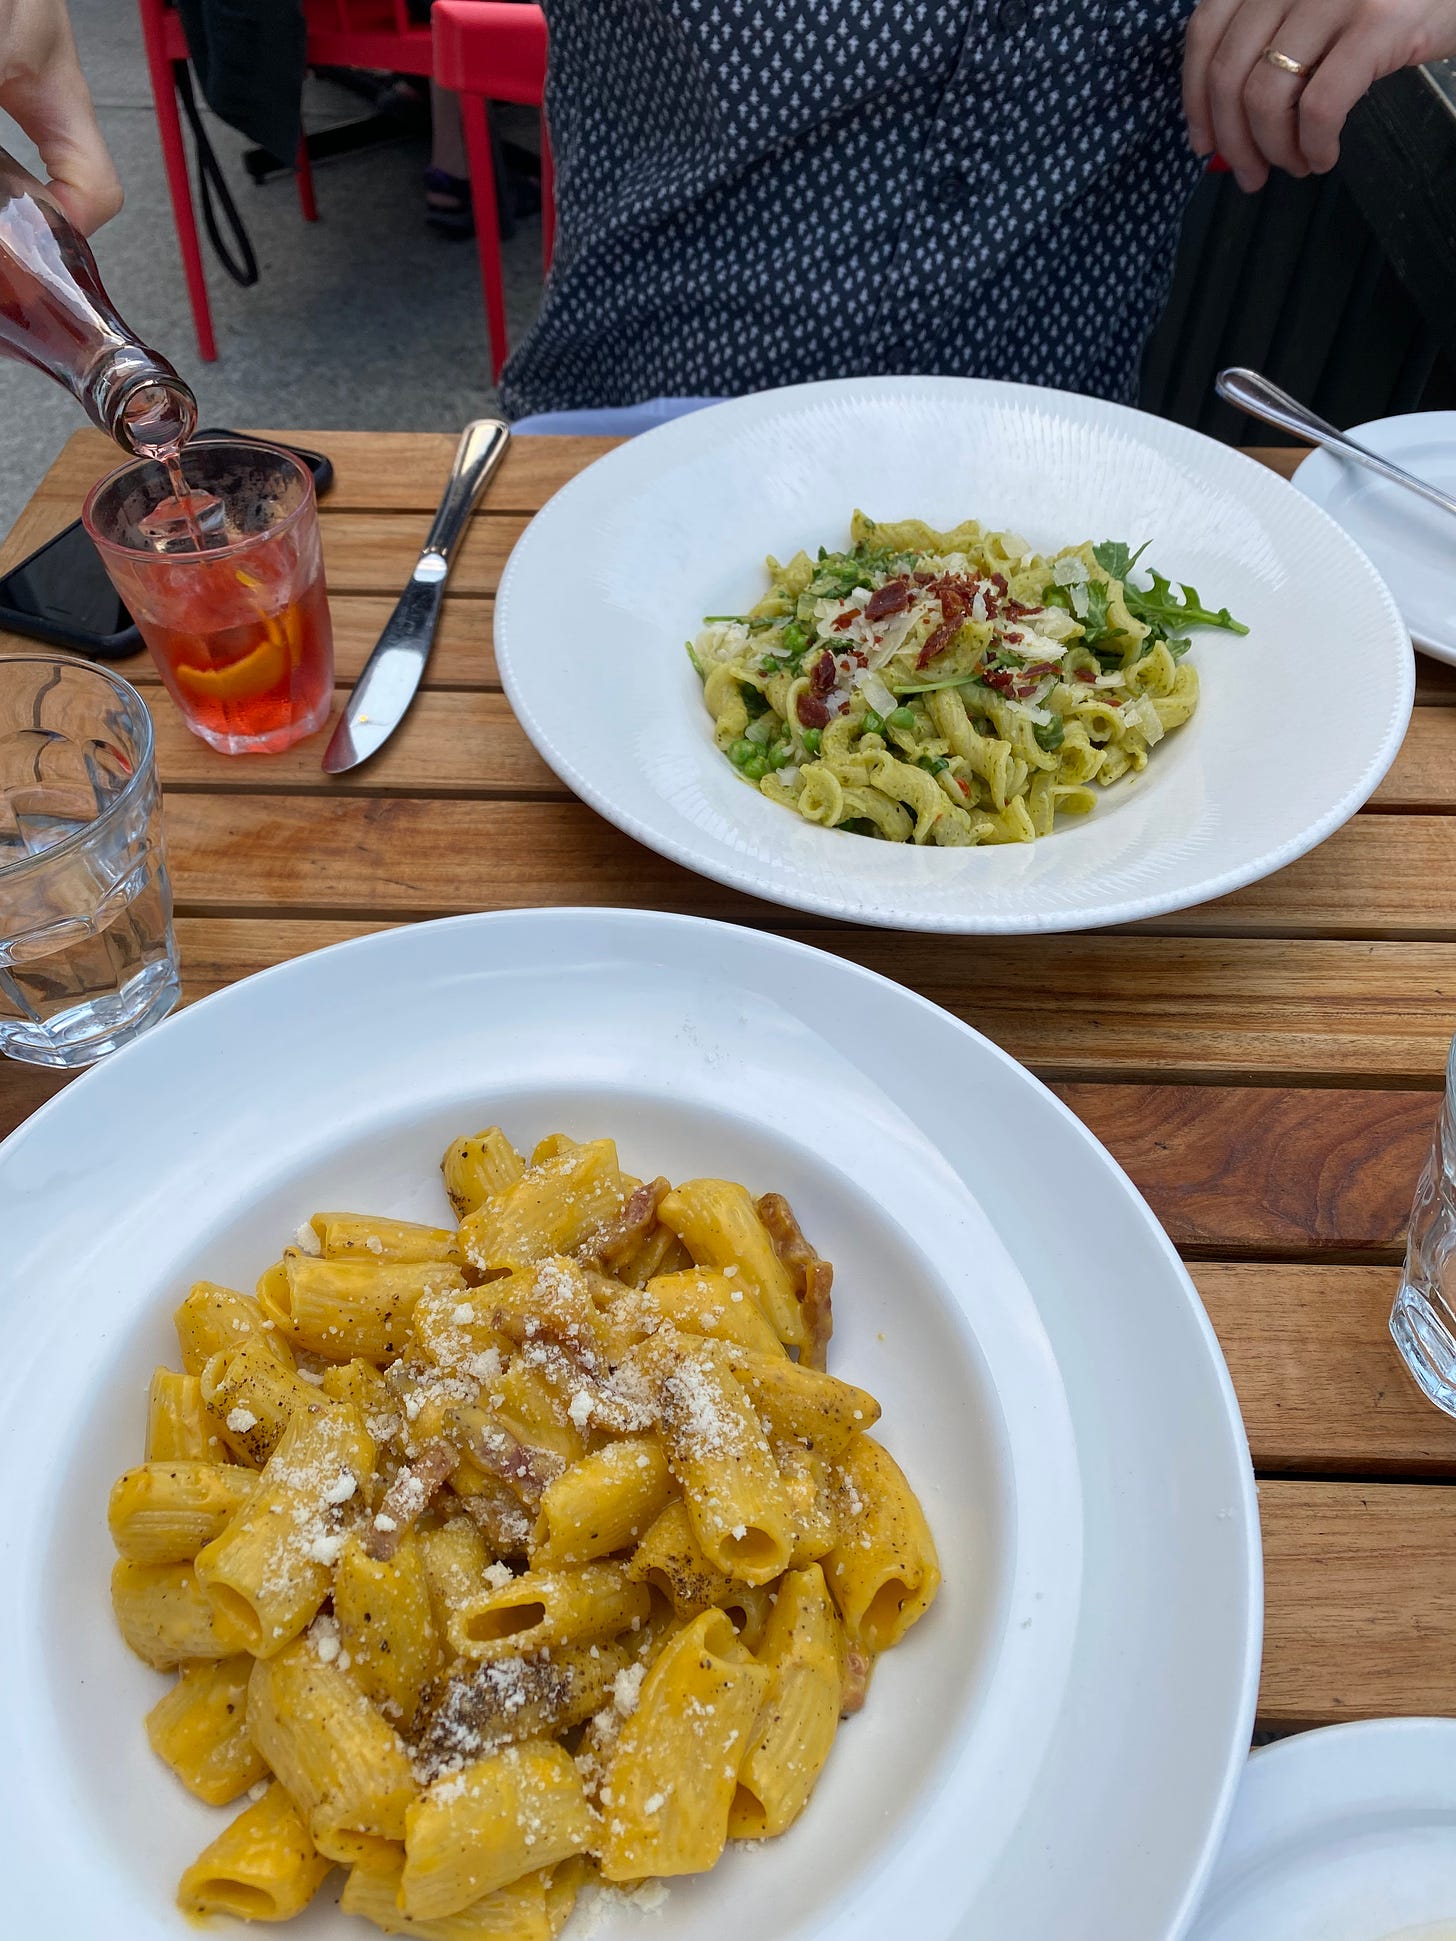 Two white bowls of pasta on a patio table. In the foreground is rigatoni carbonara, with crumbles of parmesan on top. On the other side of the table is campanelle in a green sauce with prosciutto, arugula, peas, and parmesan. Jeff's hand is in the left of the frame, pouring a red bottled cocktail into a small glass with an orange rind.